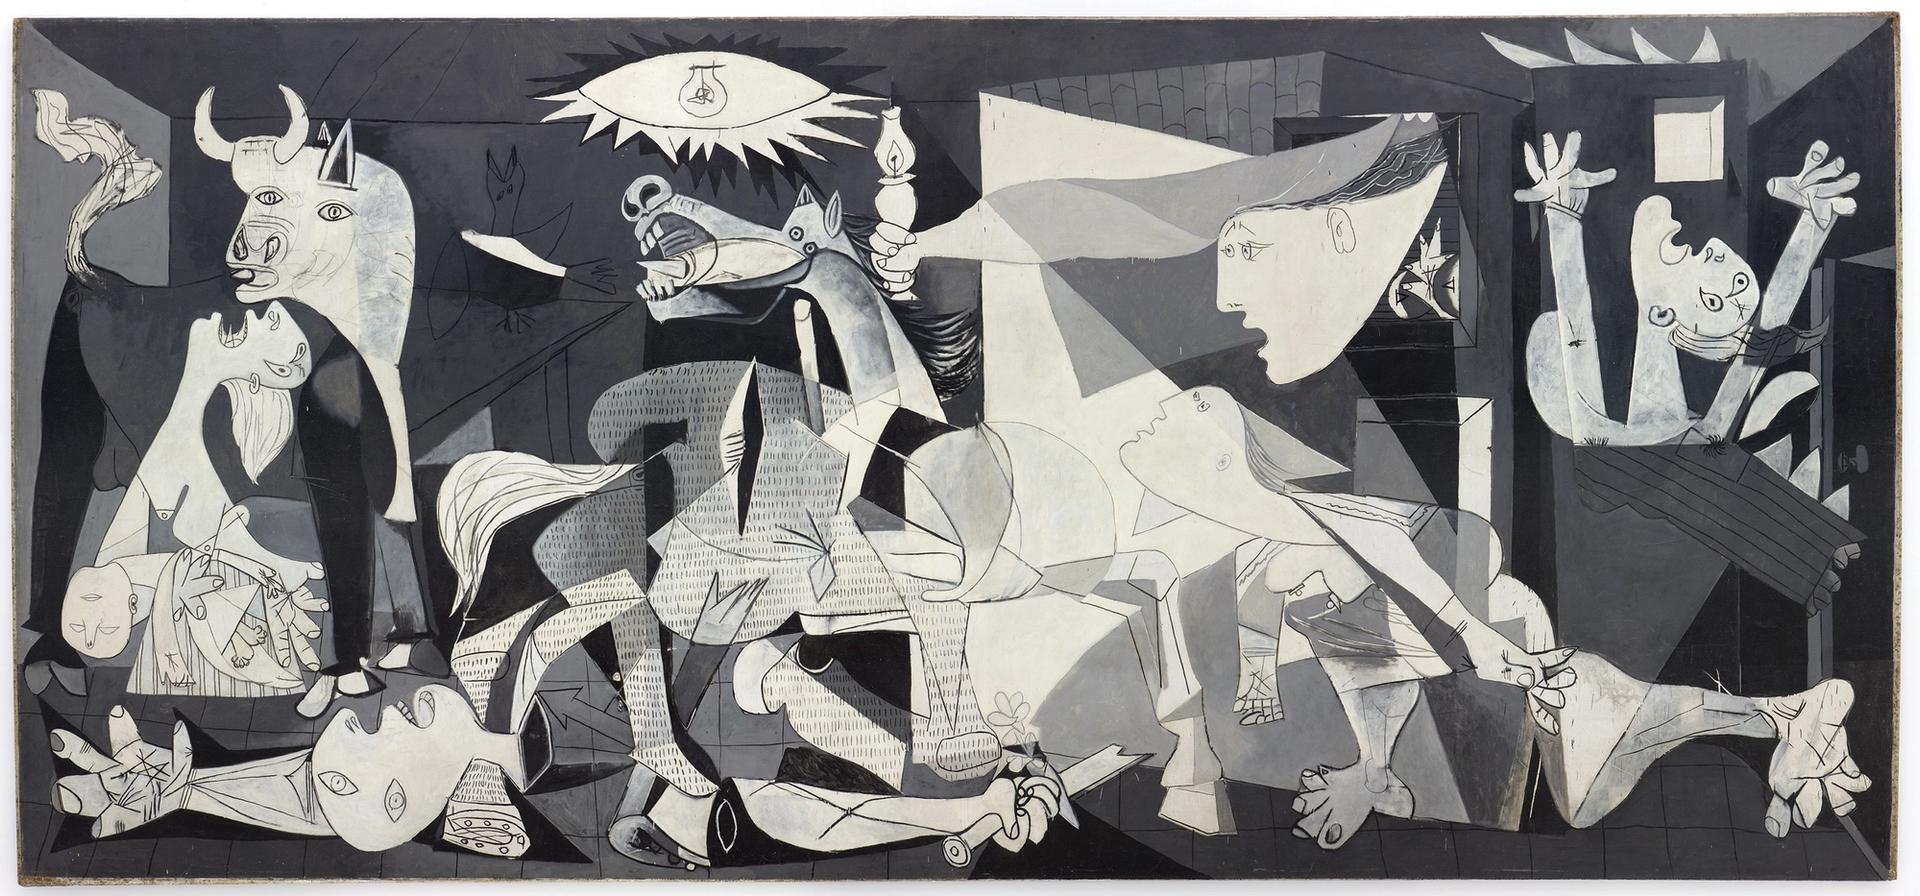 Picasso created Guernica (1937) as a testimony to the brutality of the Spanish Civil War; at the time his private life was mired in complex relationships Museo Reina Sofía; Madrid, © Succession Picasso/DACS 2021